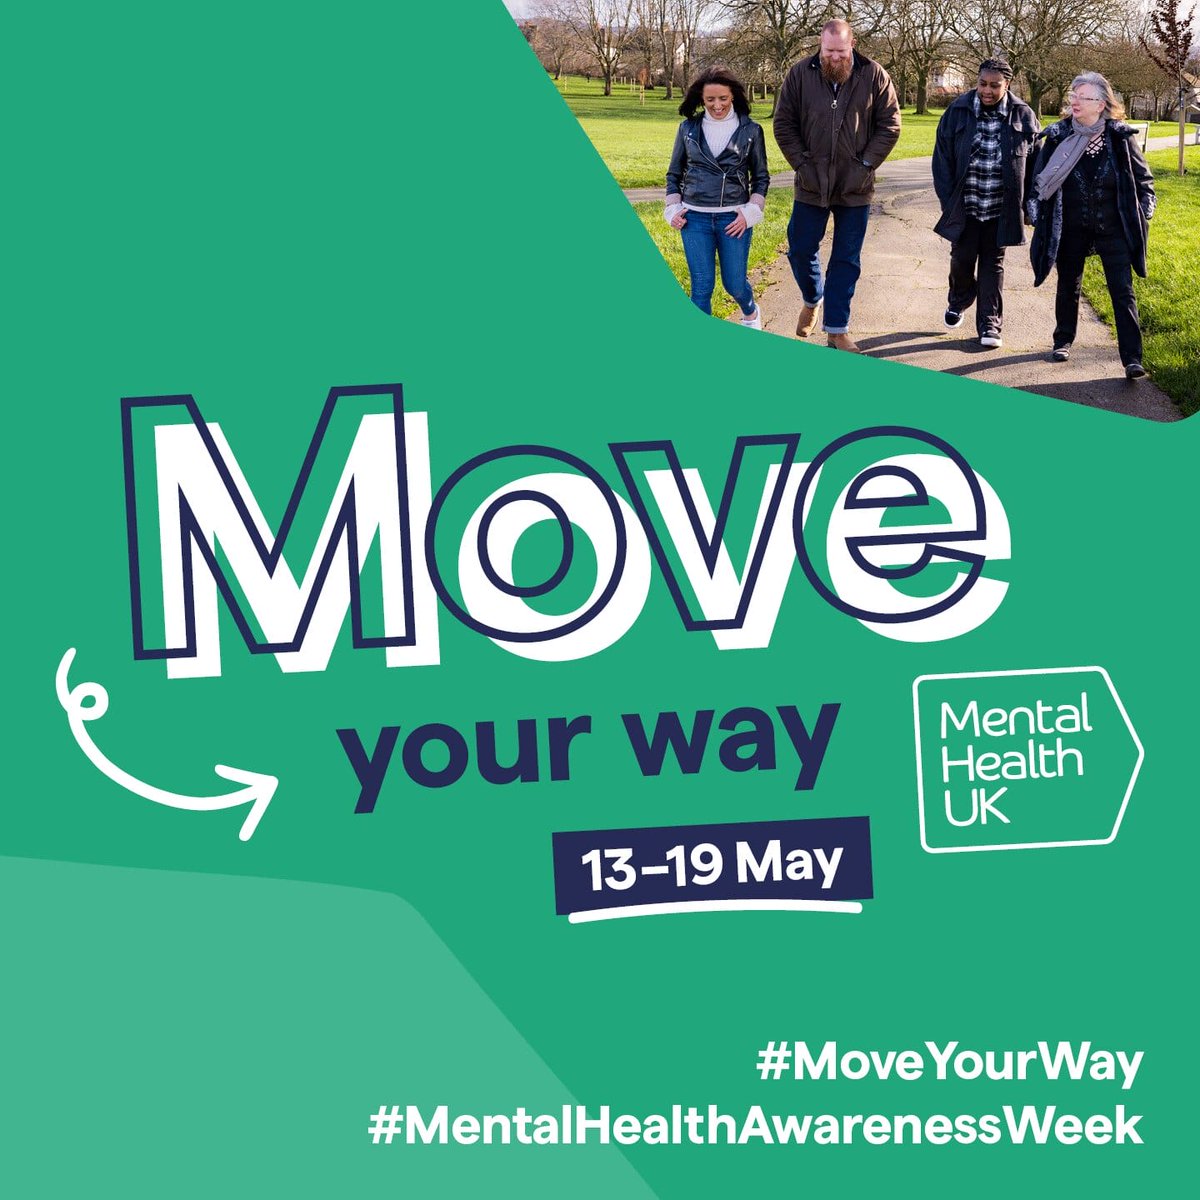 Mental Health and movement go hand in hand. Find out more about how you can improve your mental health through movement. Visit mentalhealth-uk.org/get-involved/m… #adultlearner #havering #mentalhealthawarenessweek